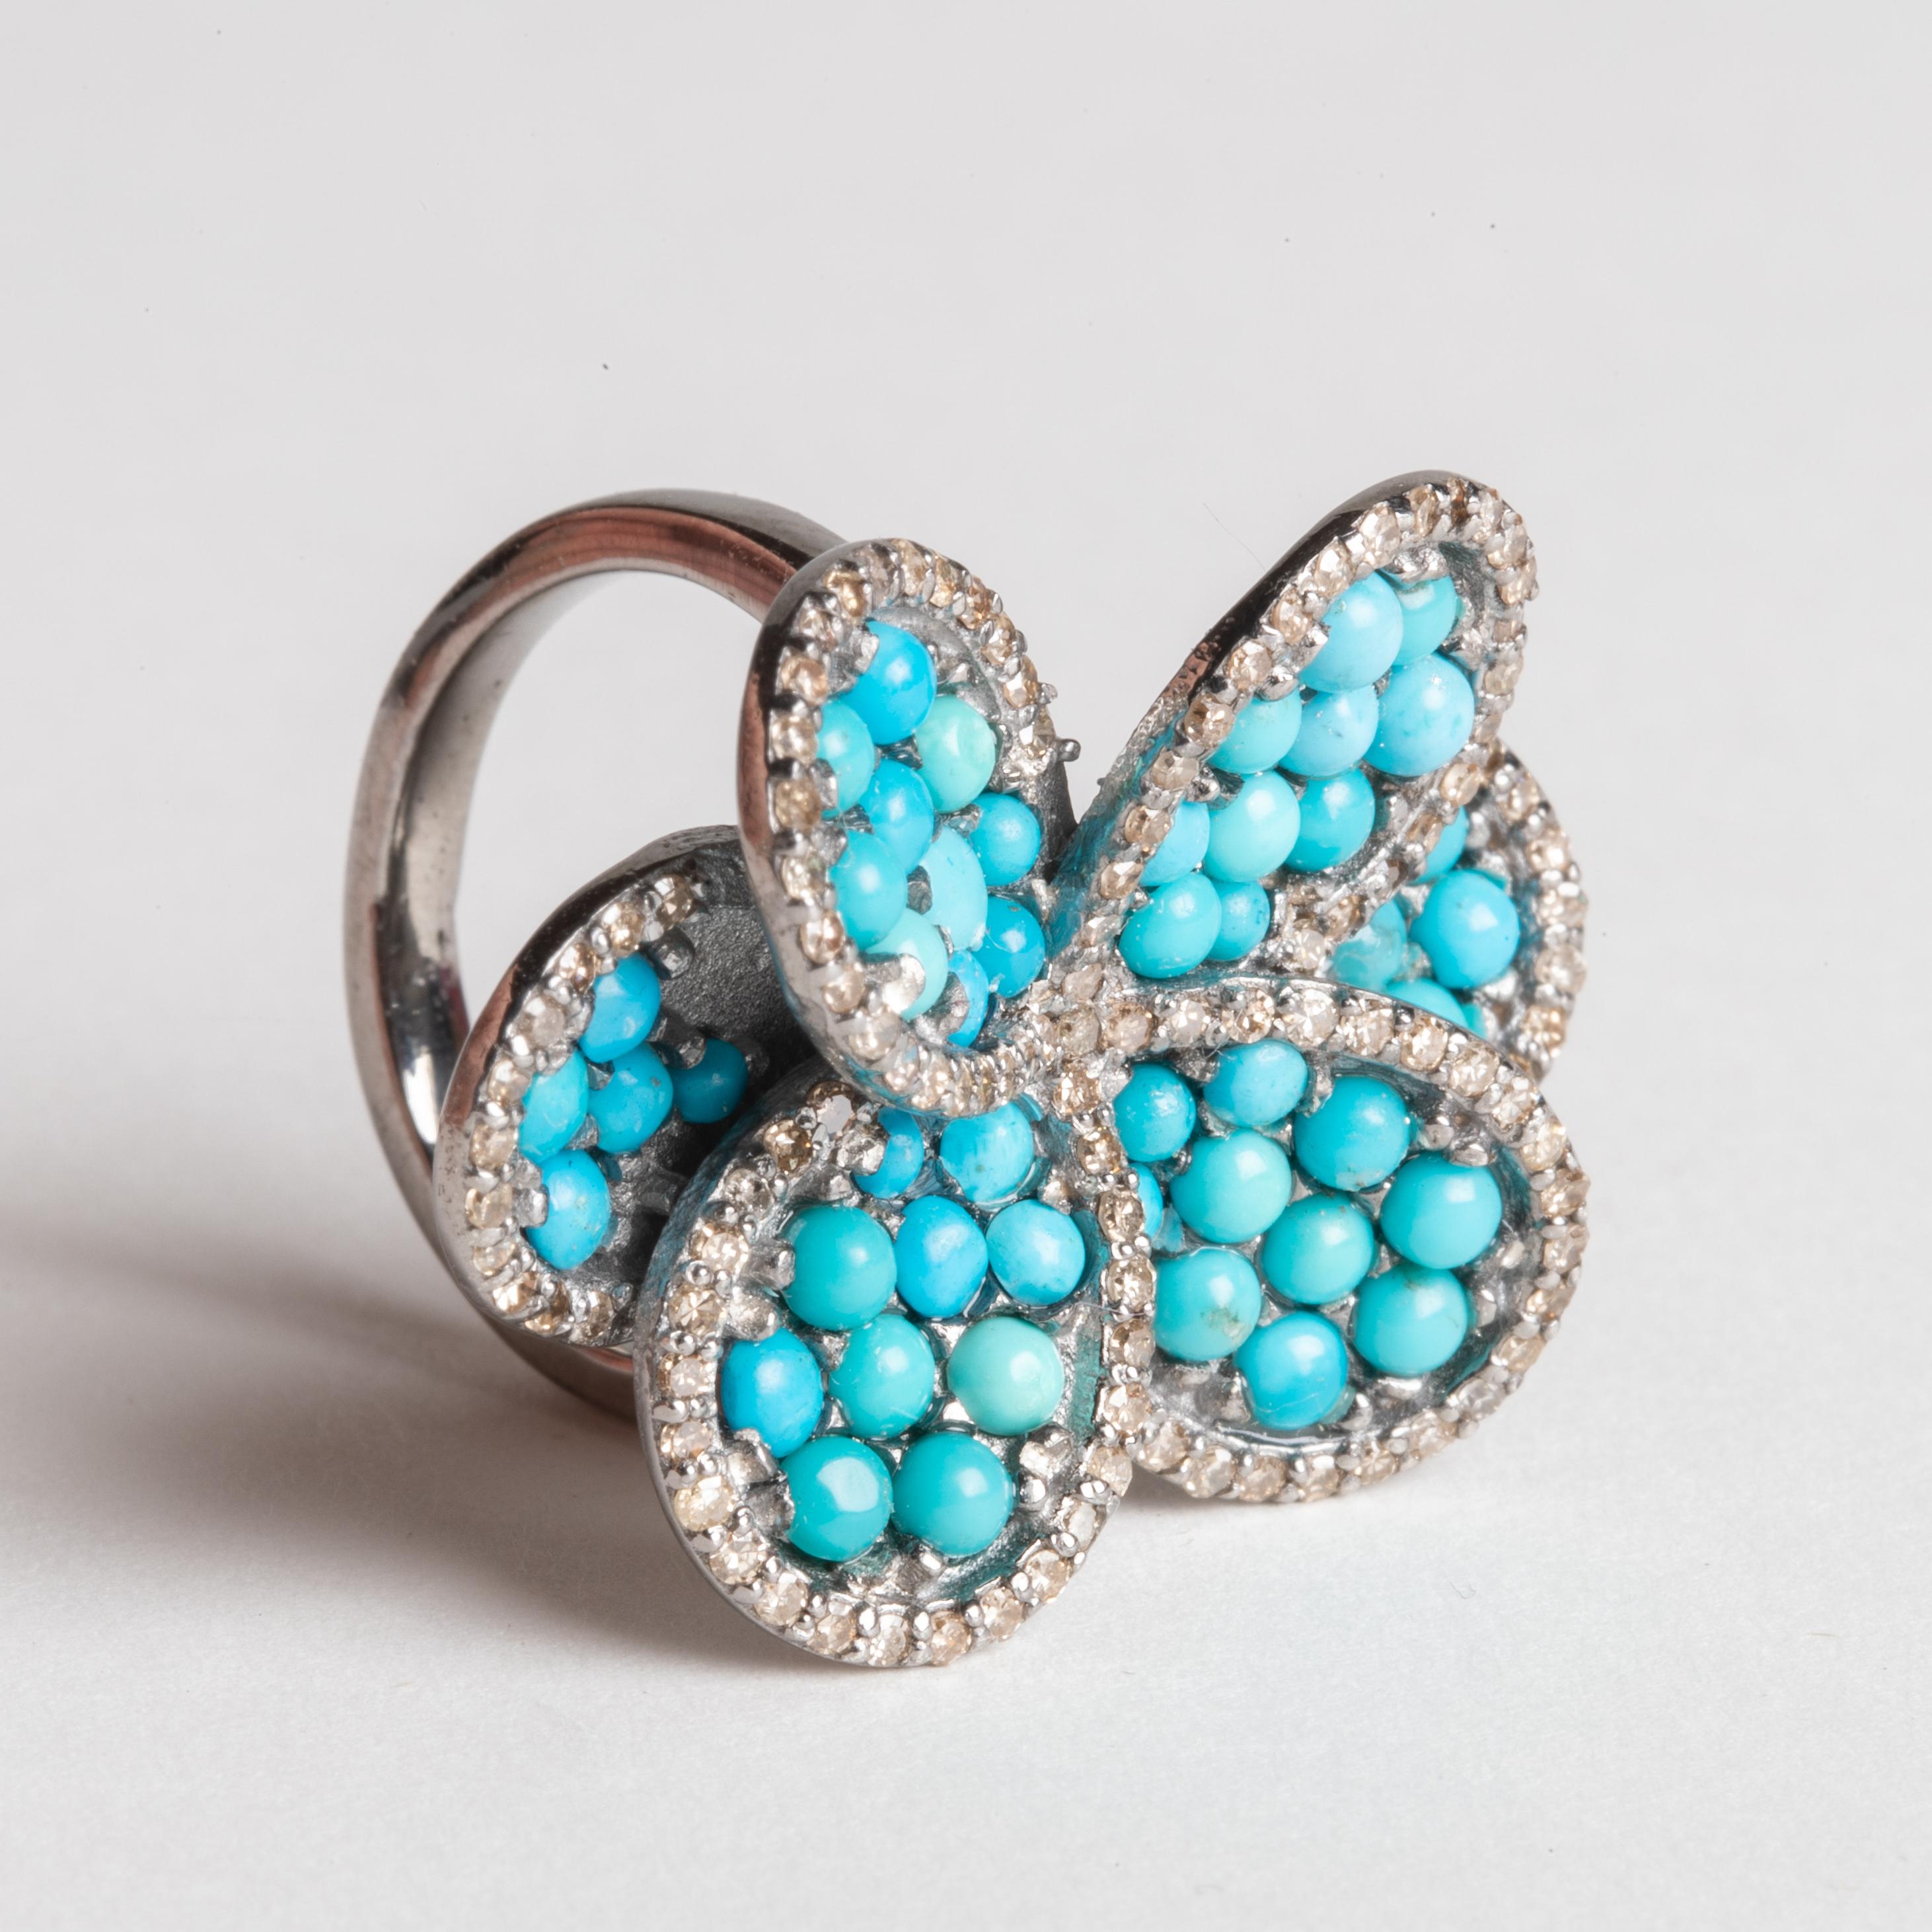 Women's or Men's Turquoise Flower Cocktail Ring with Pave`-Set Diamonds